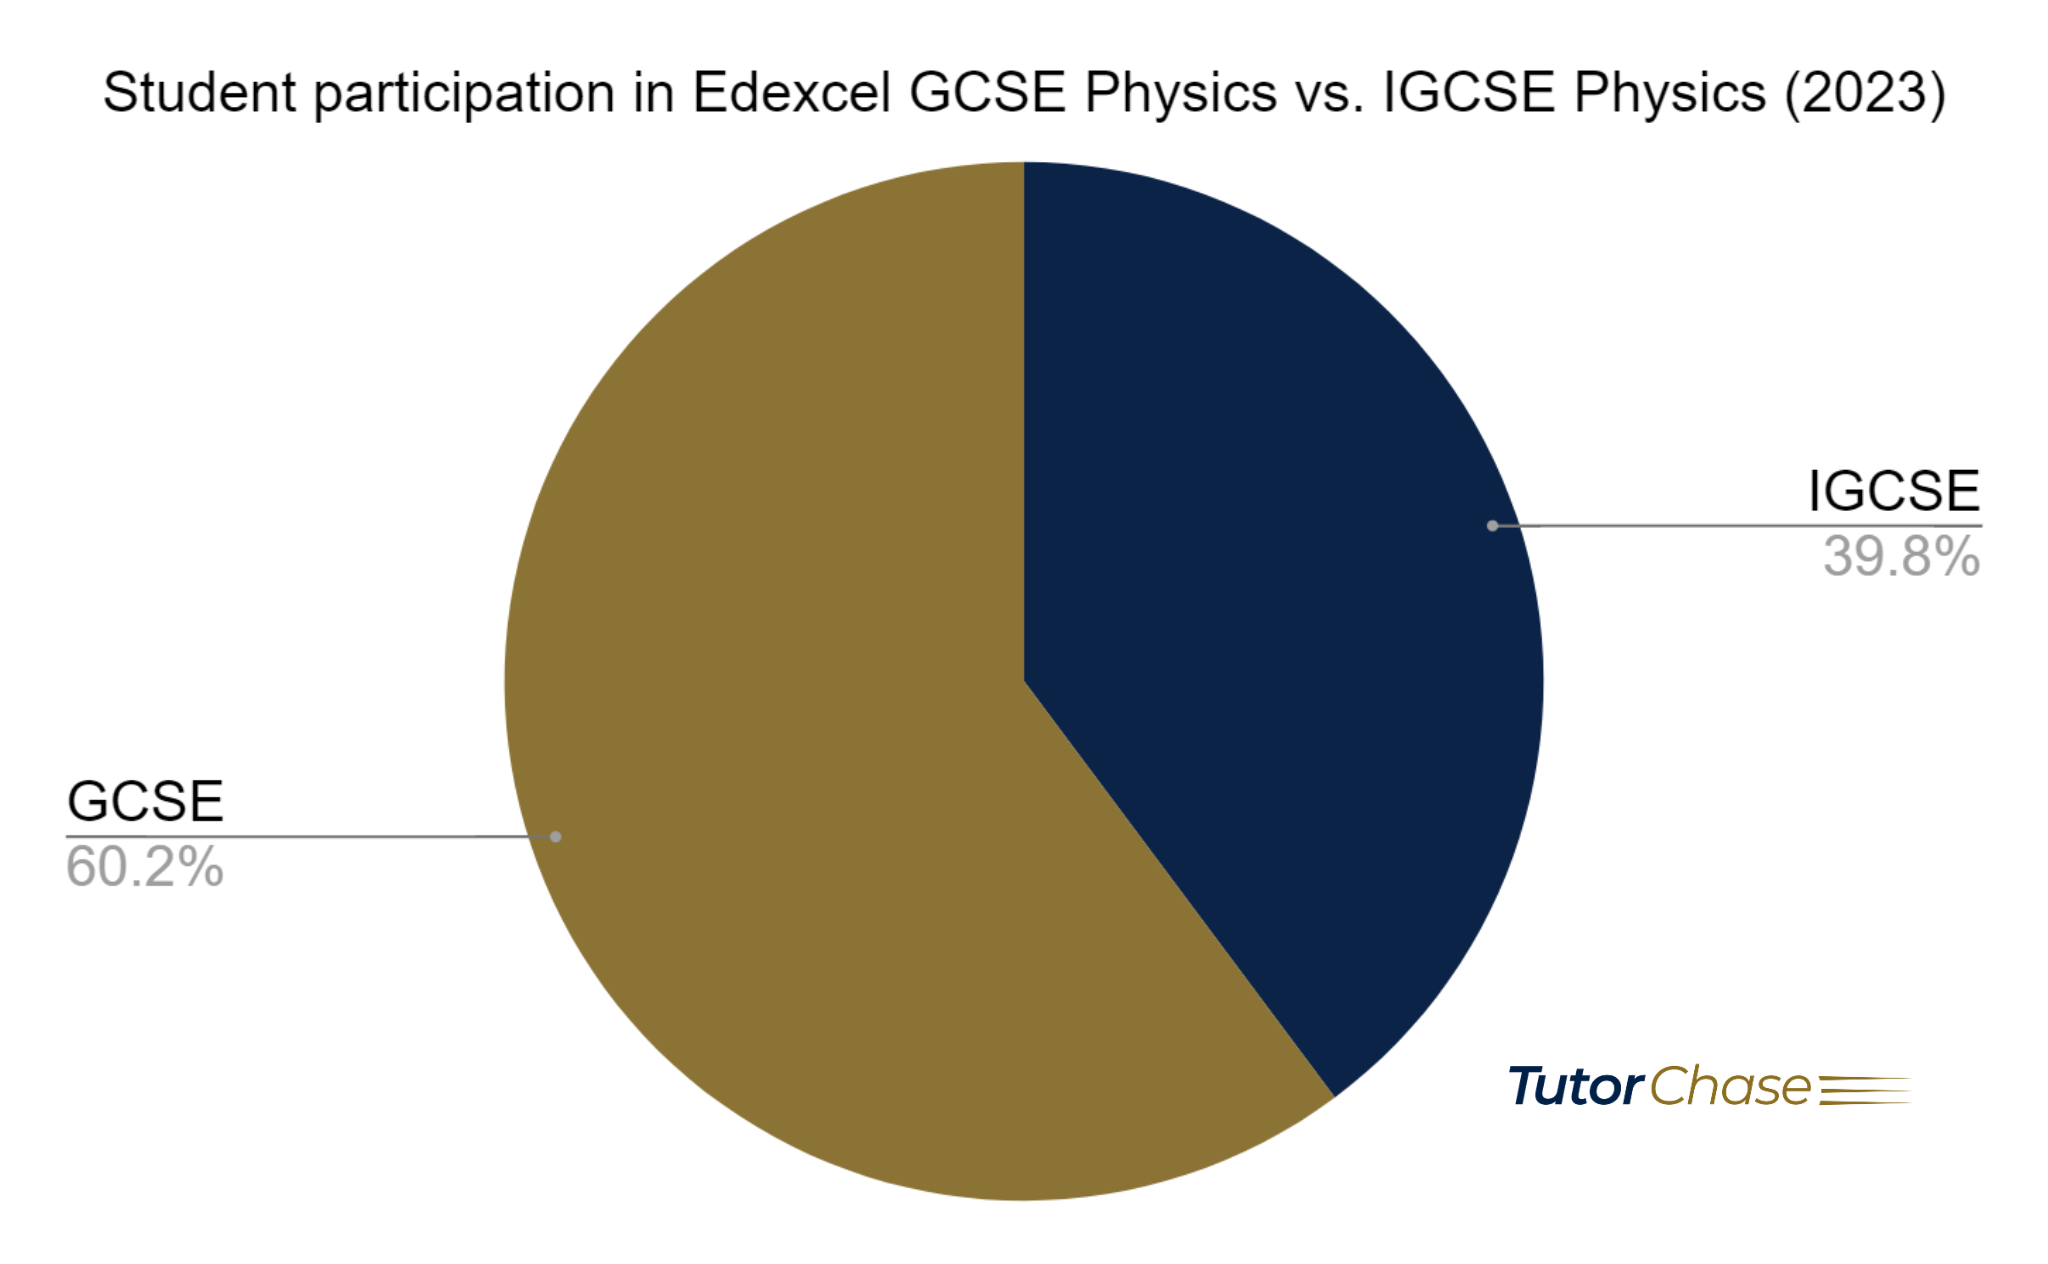 student participation in Edexcel GCSE Physics vs. IGCSE Physics in the UK